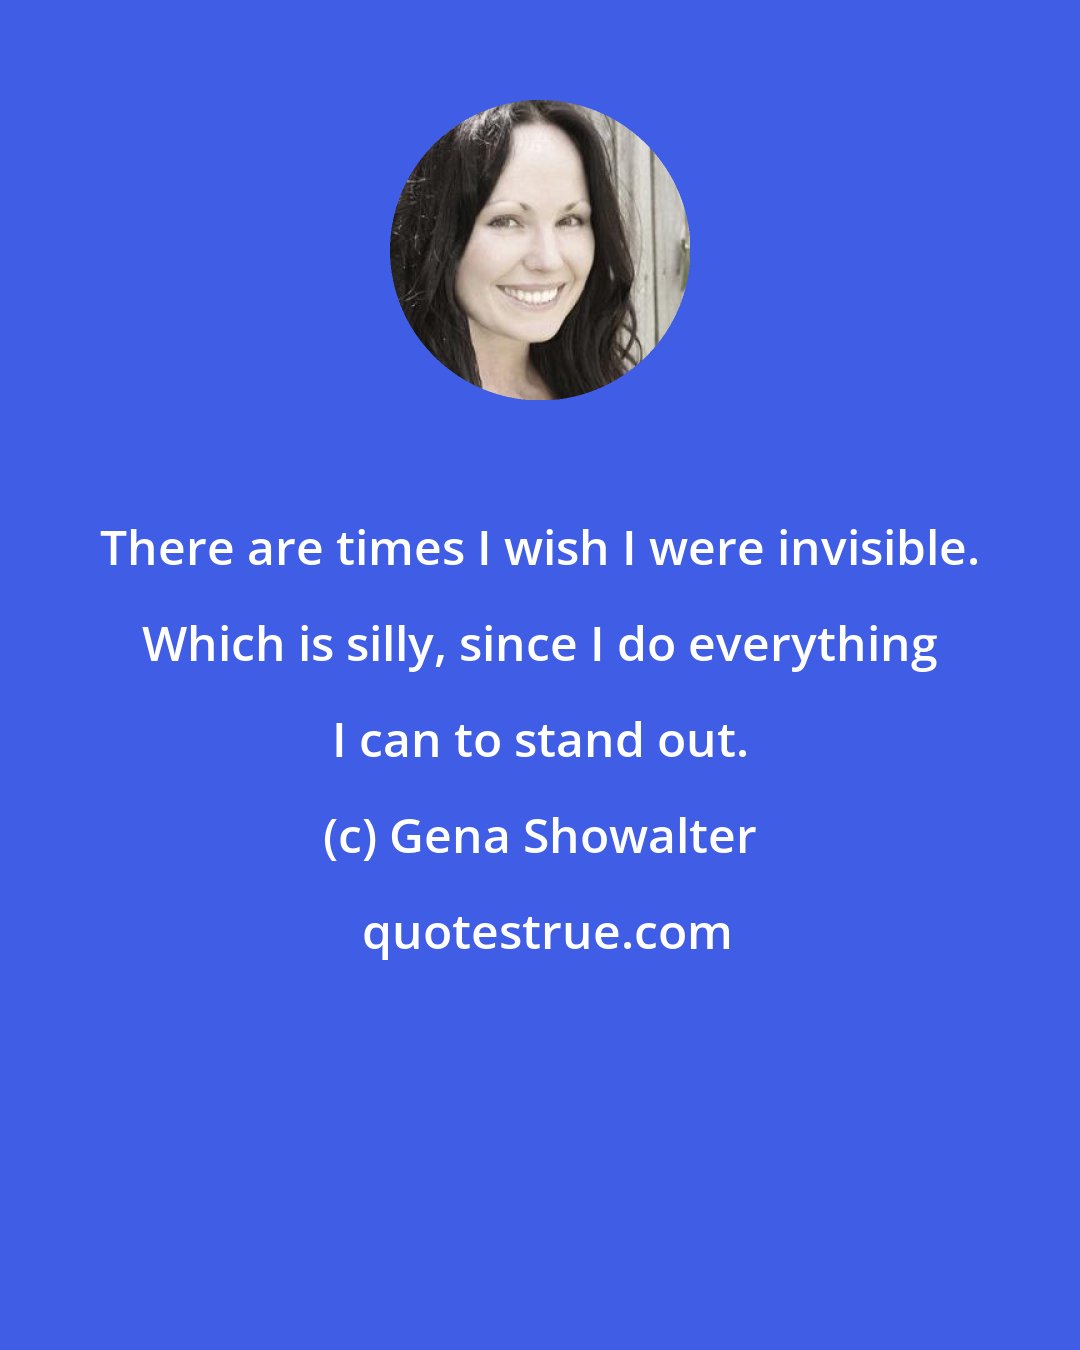 Gena Showalter: There are times I wish I were invisible. Which is silly, since I do everything I can to stand out.